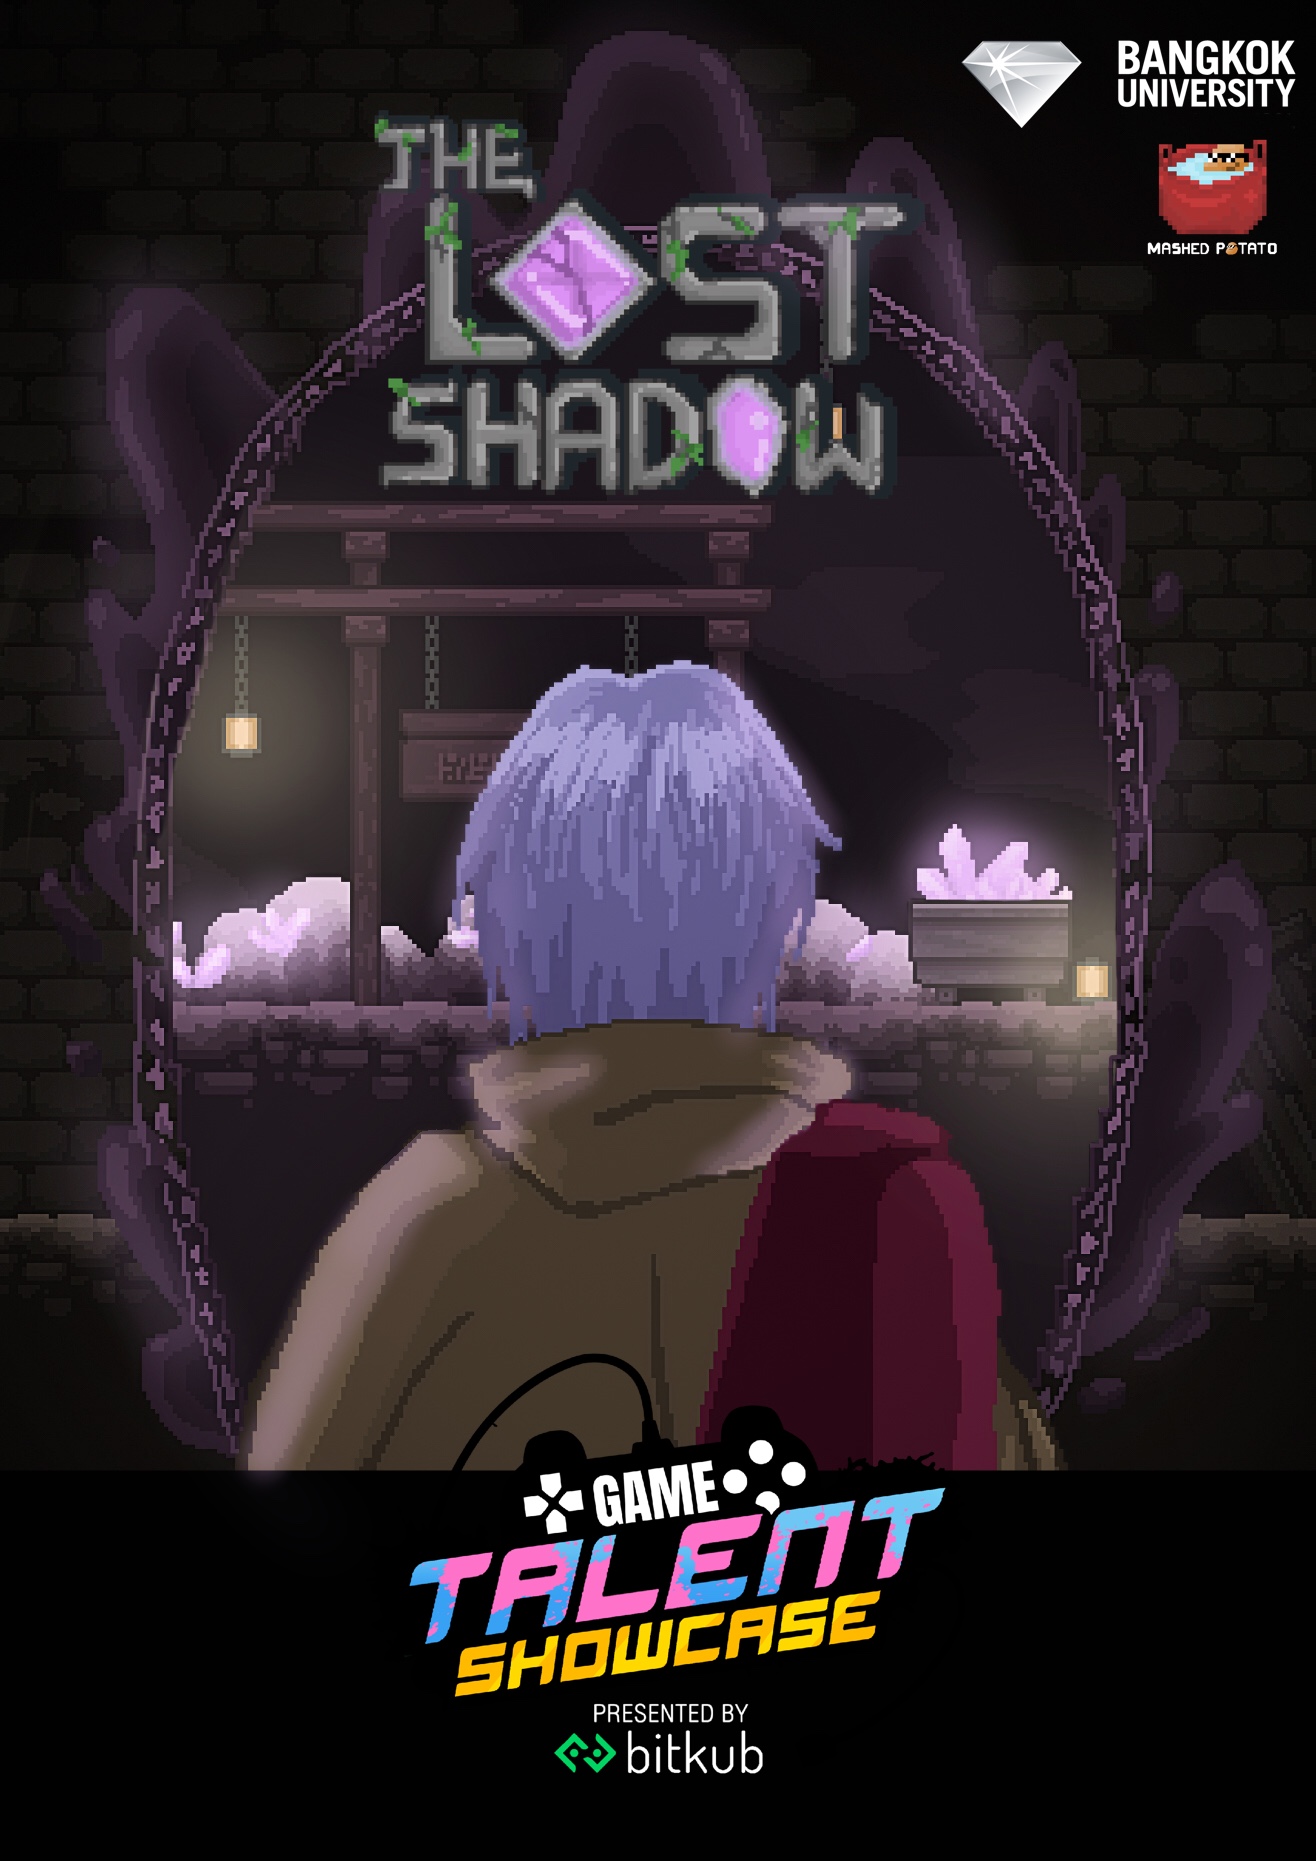 The Lost Shadow